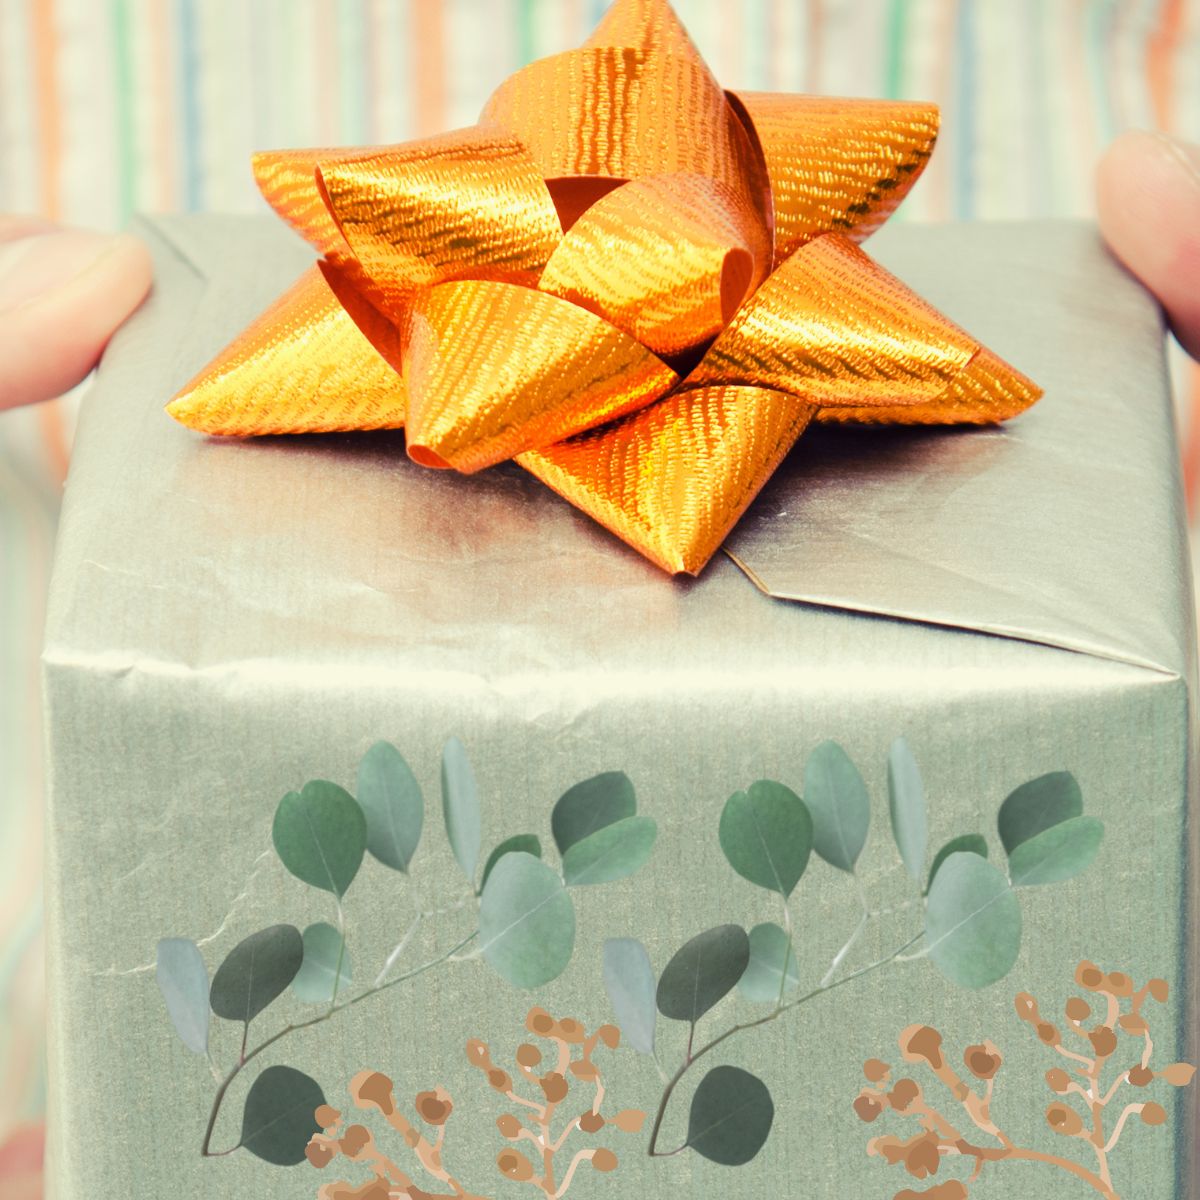 wrapped gift with a yellow bow